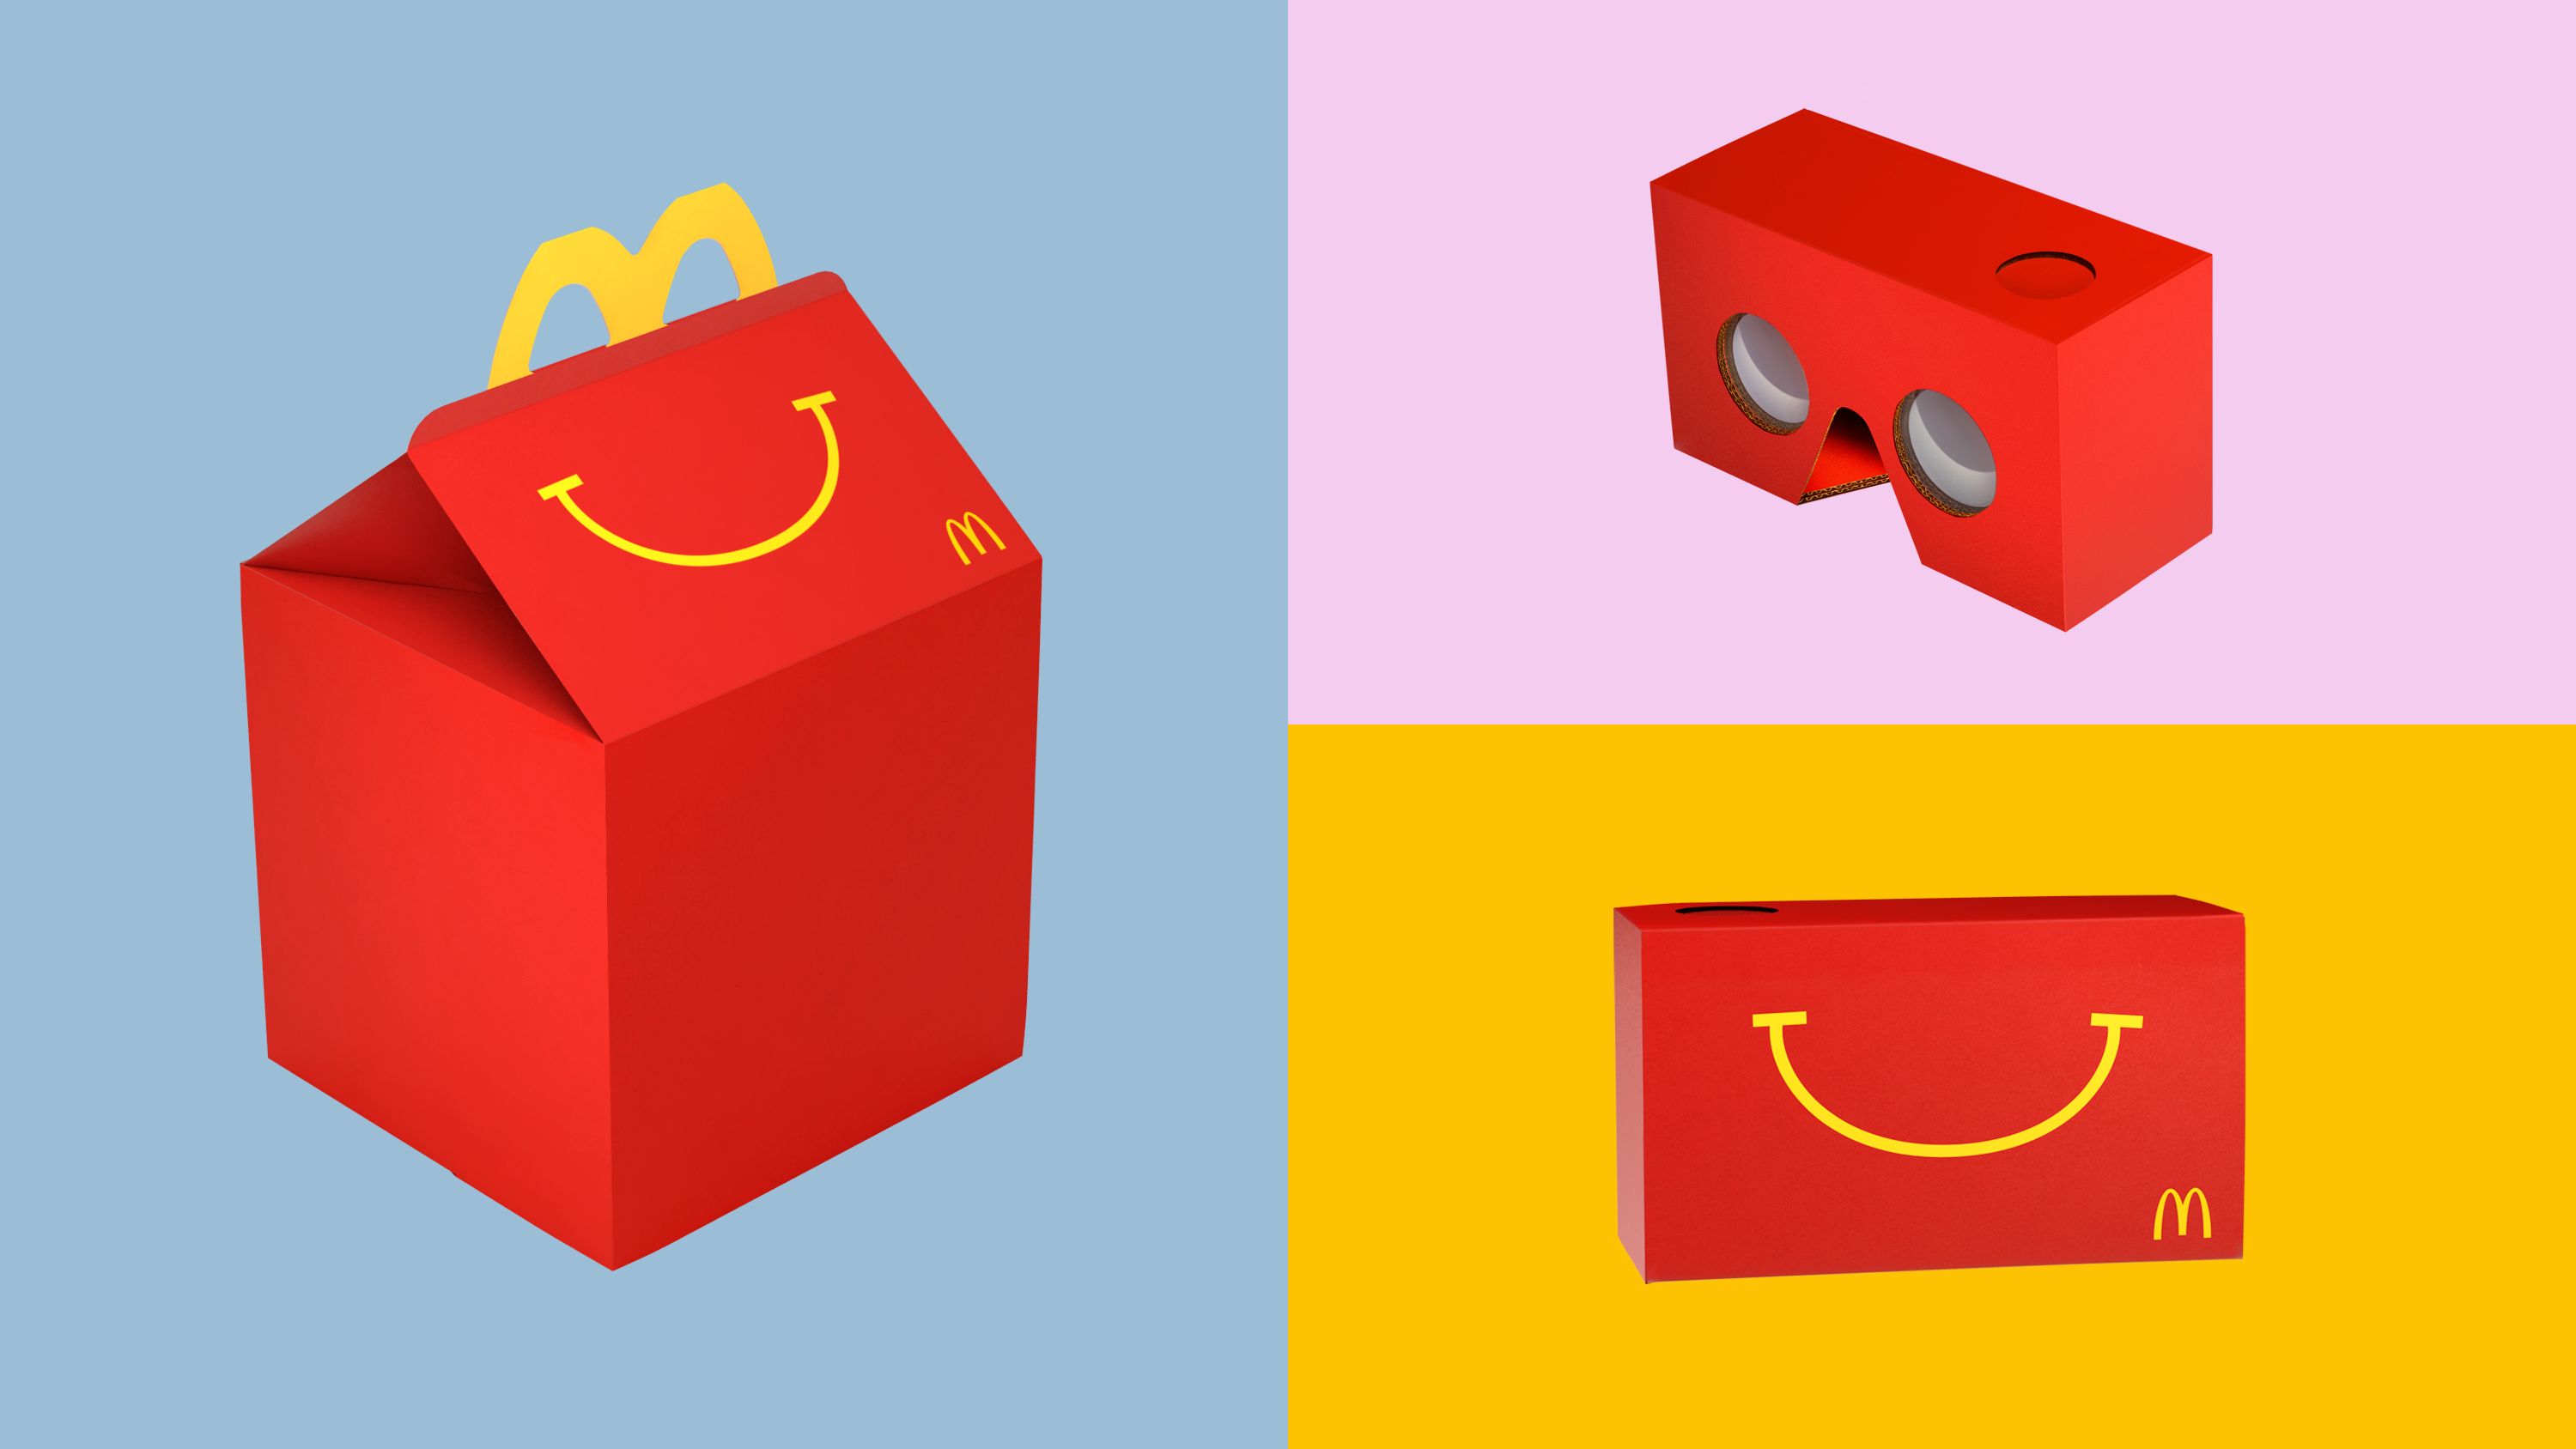 McDonalds Turns Happy Meal Boxes into Happy Goggles VR Headsets